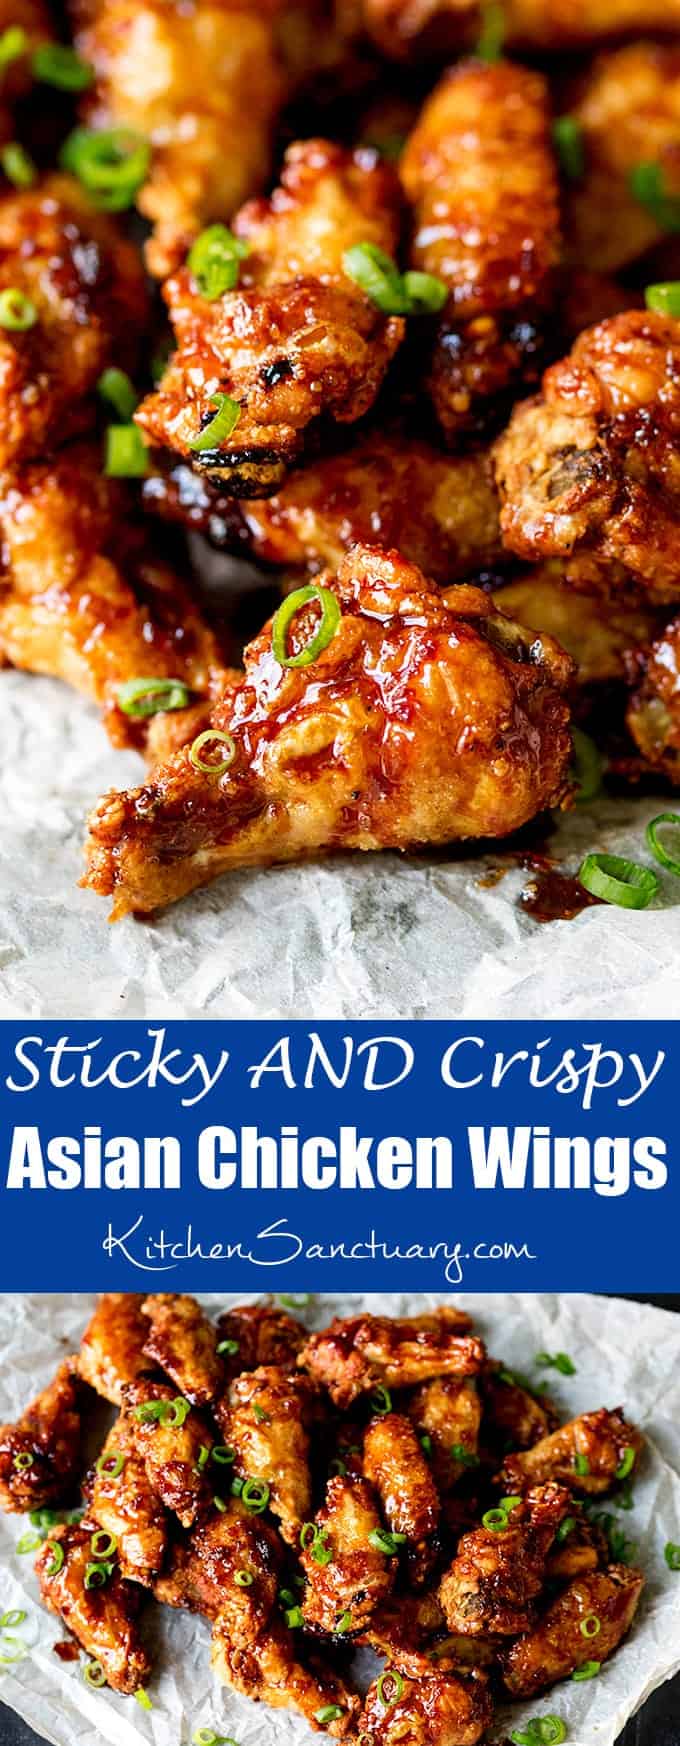 These Asian Chicken Wings are Sticky AND Crispy. The best party food ever!